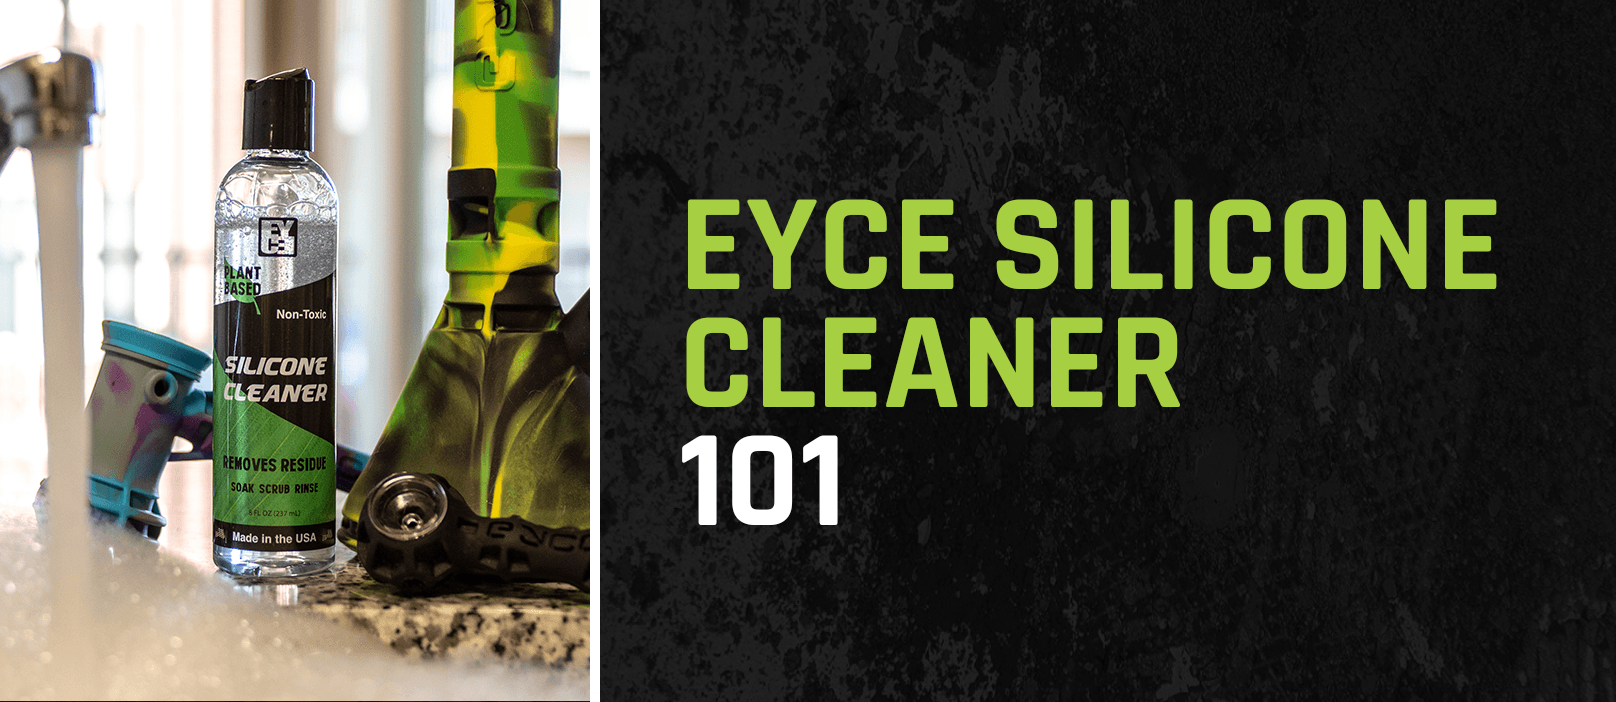 Eyce Silicone Cleaner - Cleaning Silicone Pipe - Silicone Pipe